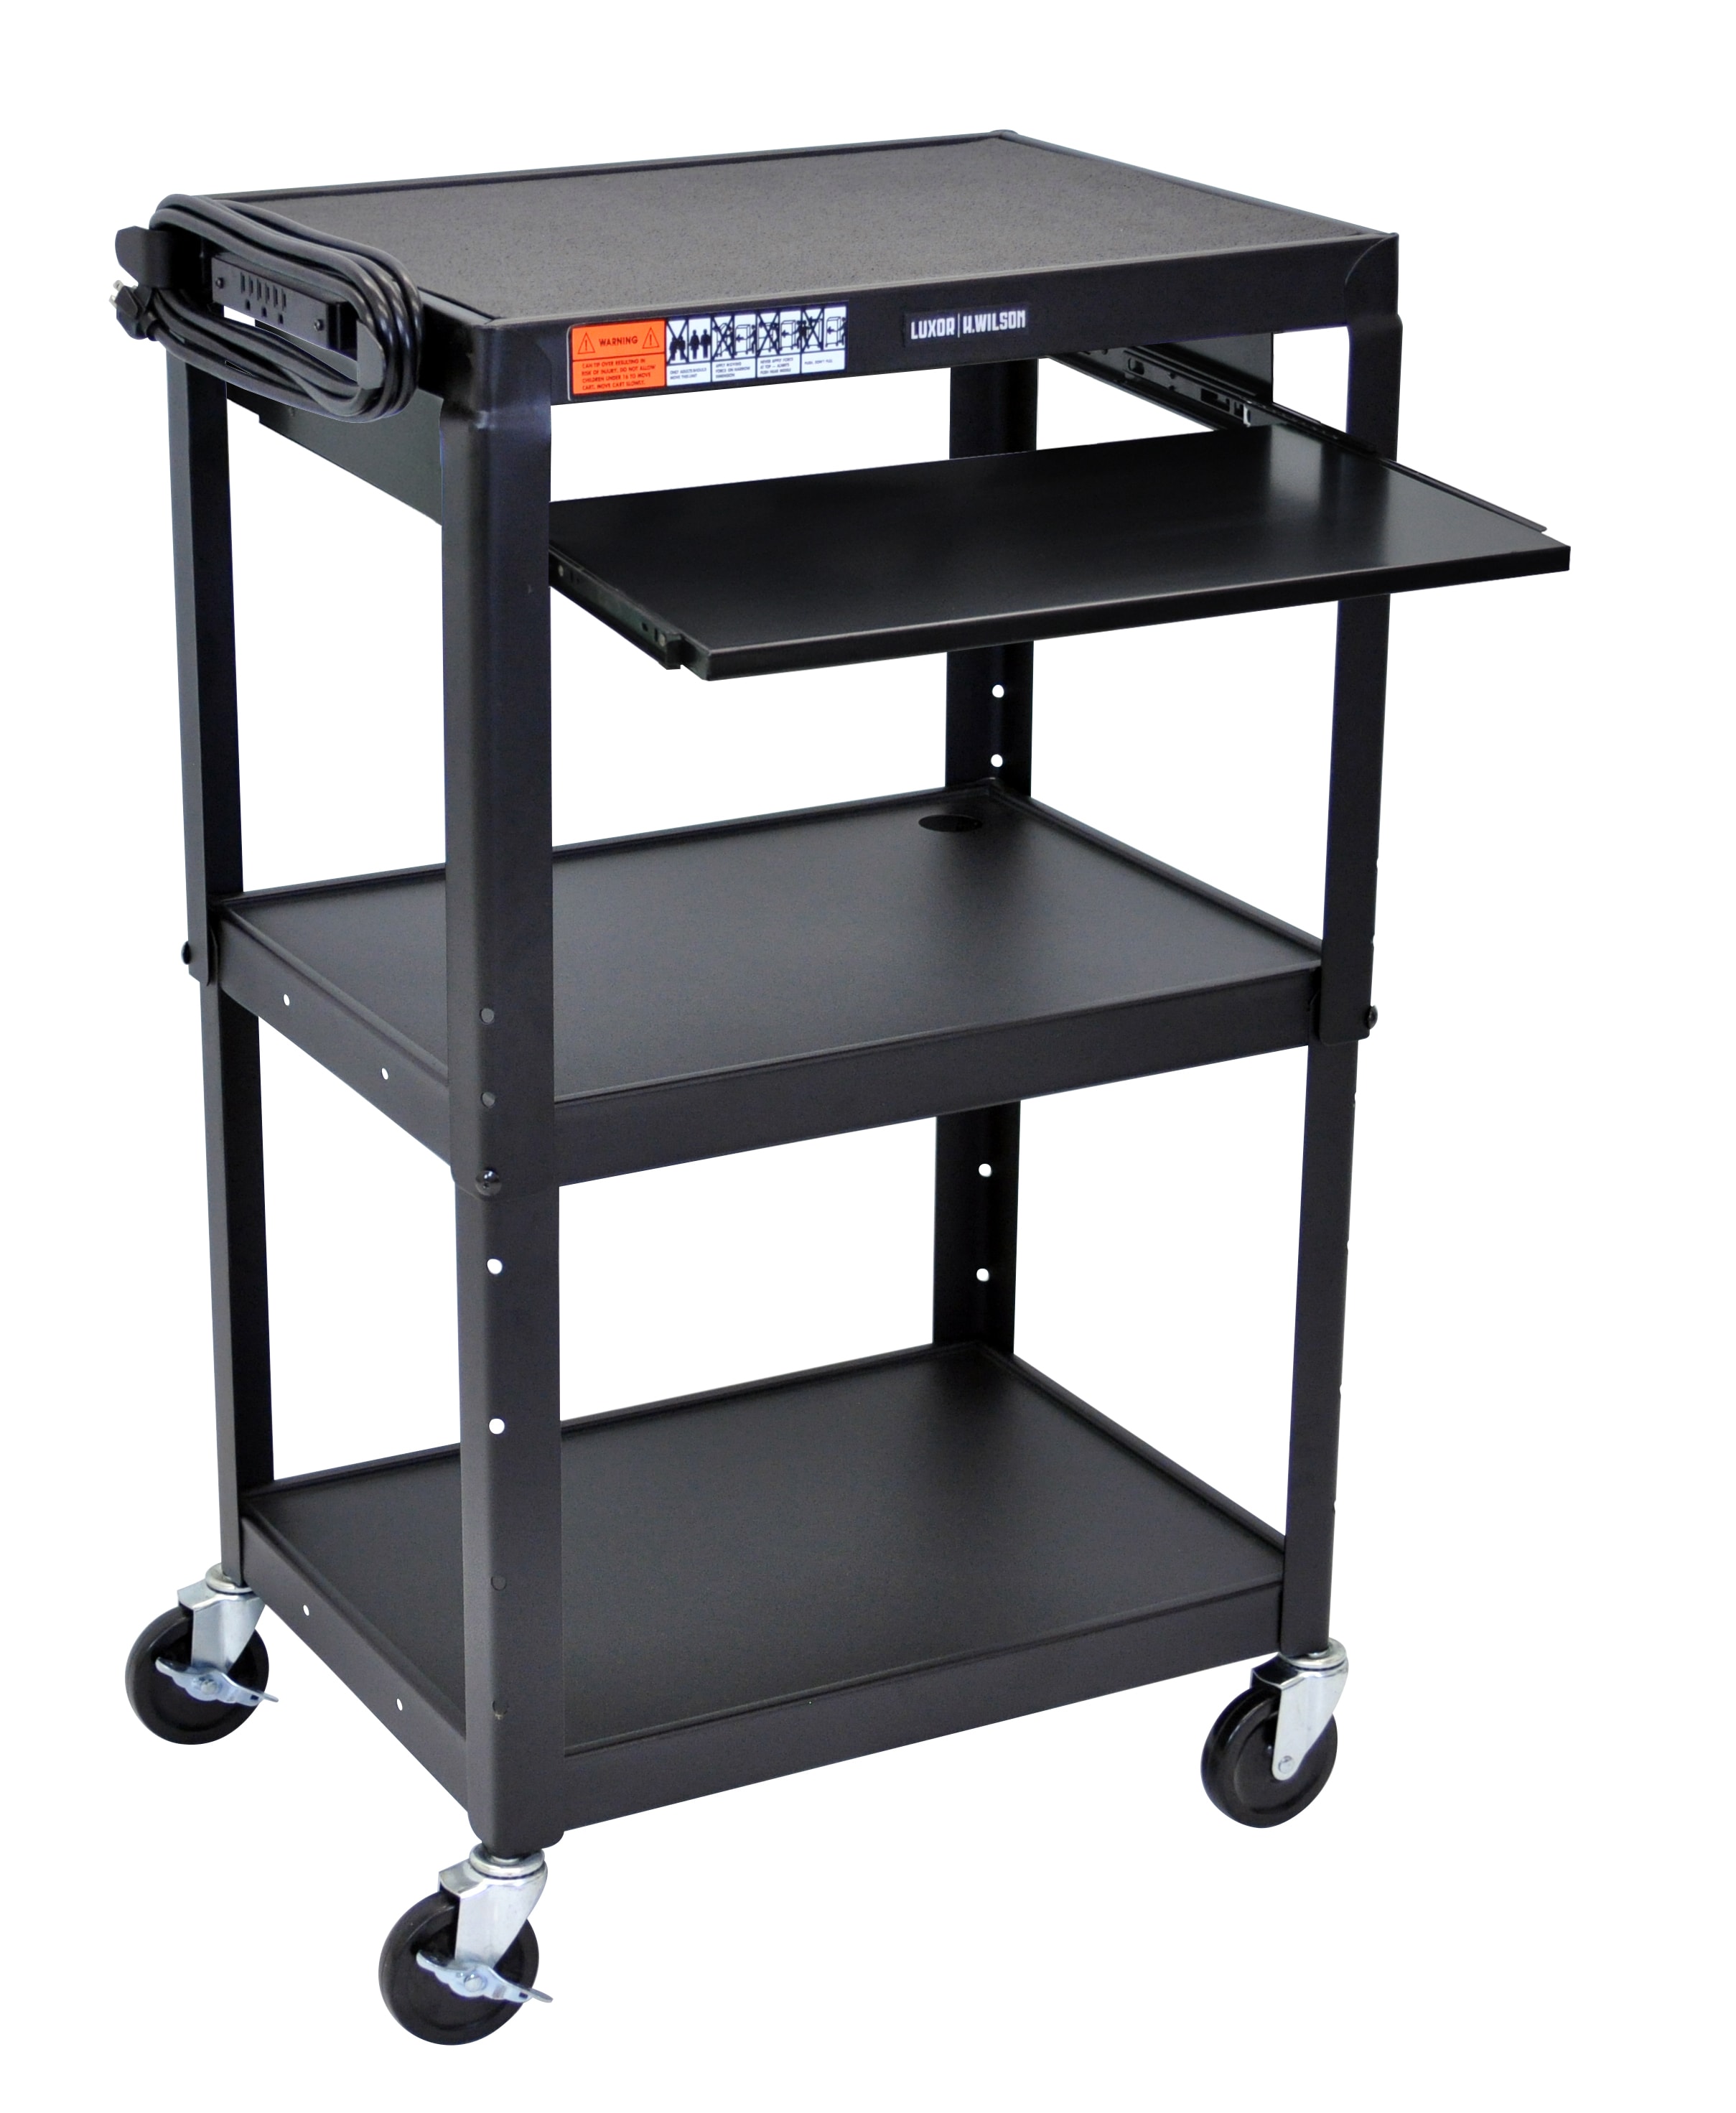 Rubbermaid Commercial Products 33.25-in-Drawer Shelf Utility Cart at